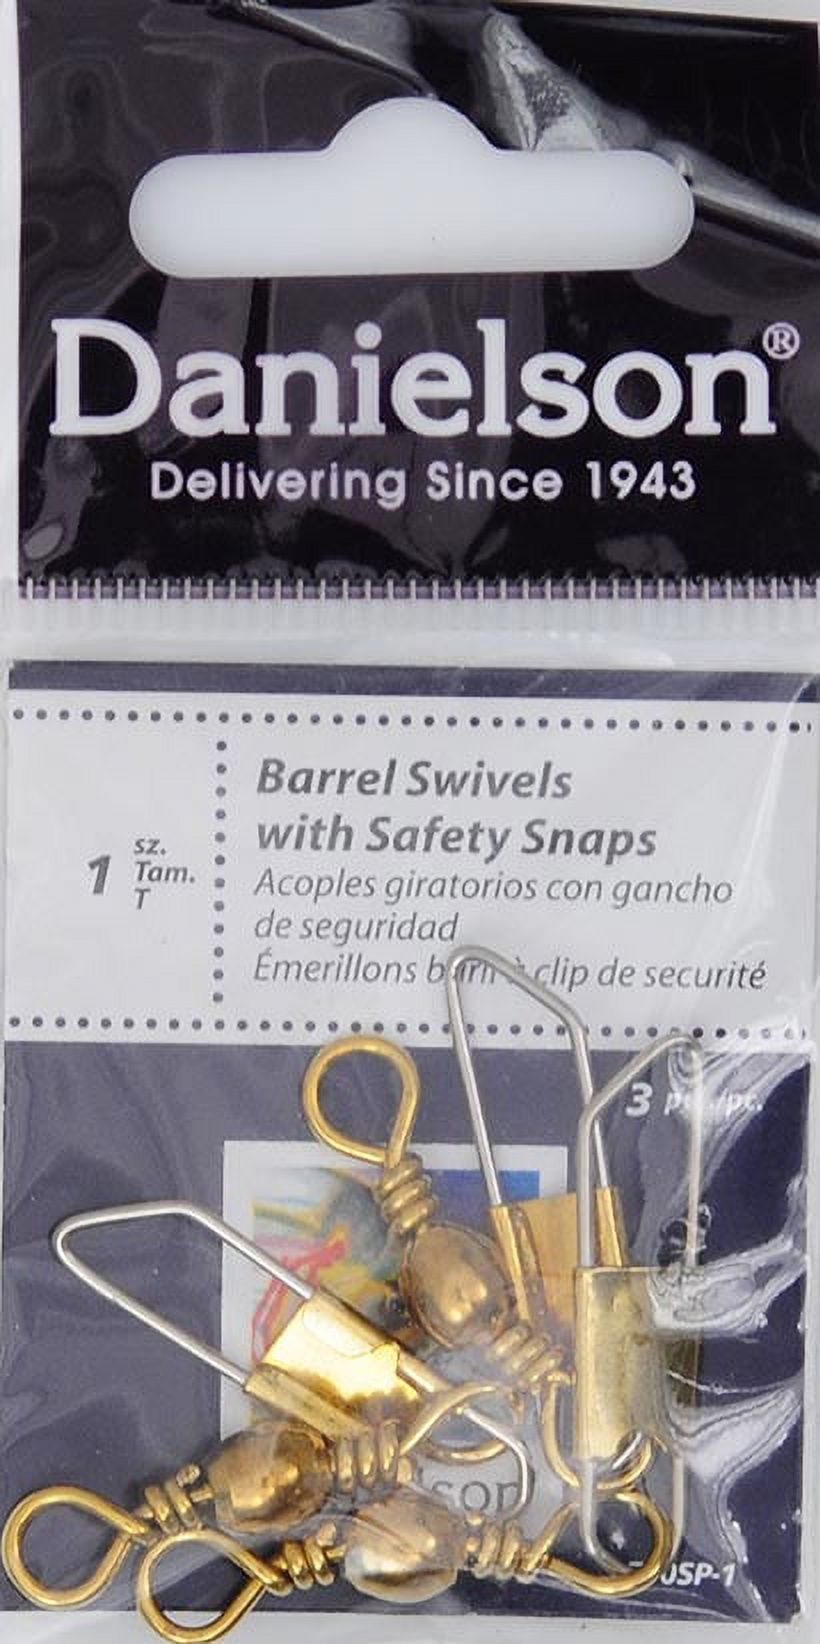 Danielson Solid Brass Barrel Swivels w/ Safety Snaps Fishing Terminal Tackle, #1, 3-pack - image 2 of 3